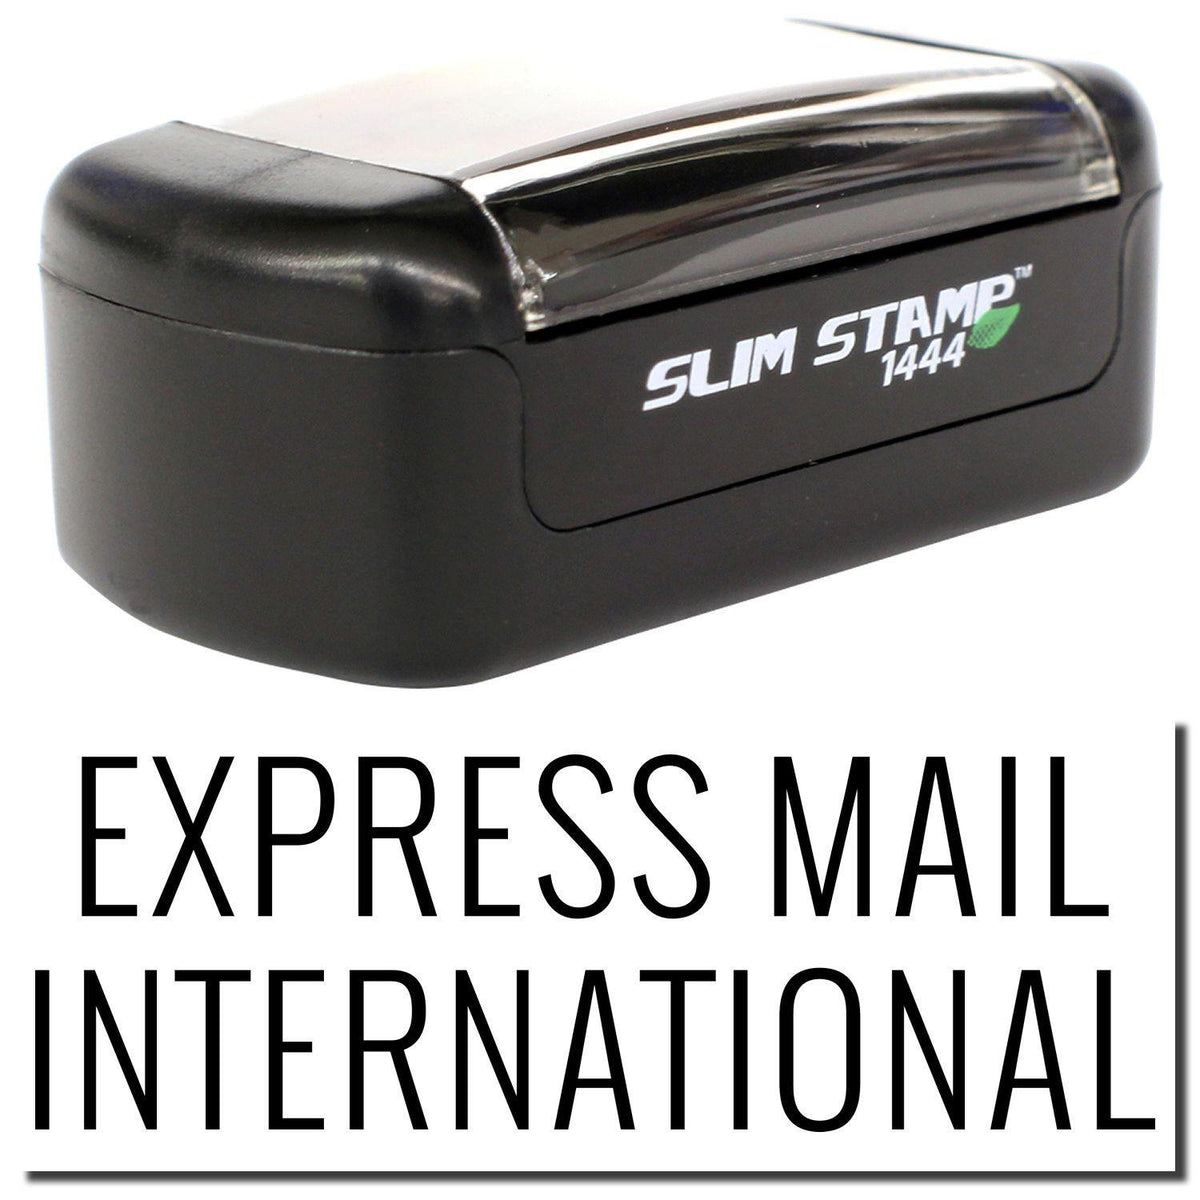 A stock office pre-inked stamp with a stamped image showing how the text &quot;EXPRESS MAIL INTERNATIONAL&quot; is displayed after stamping.